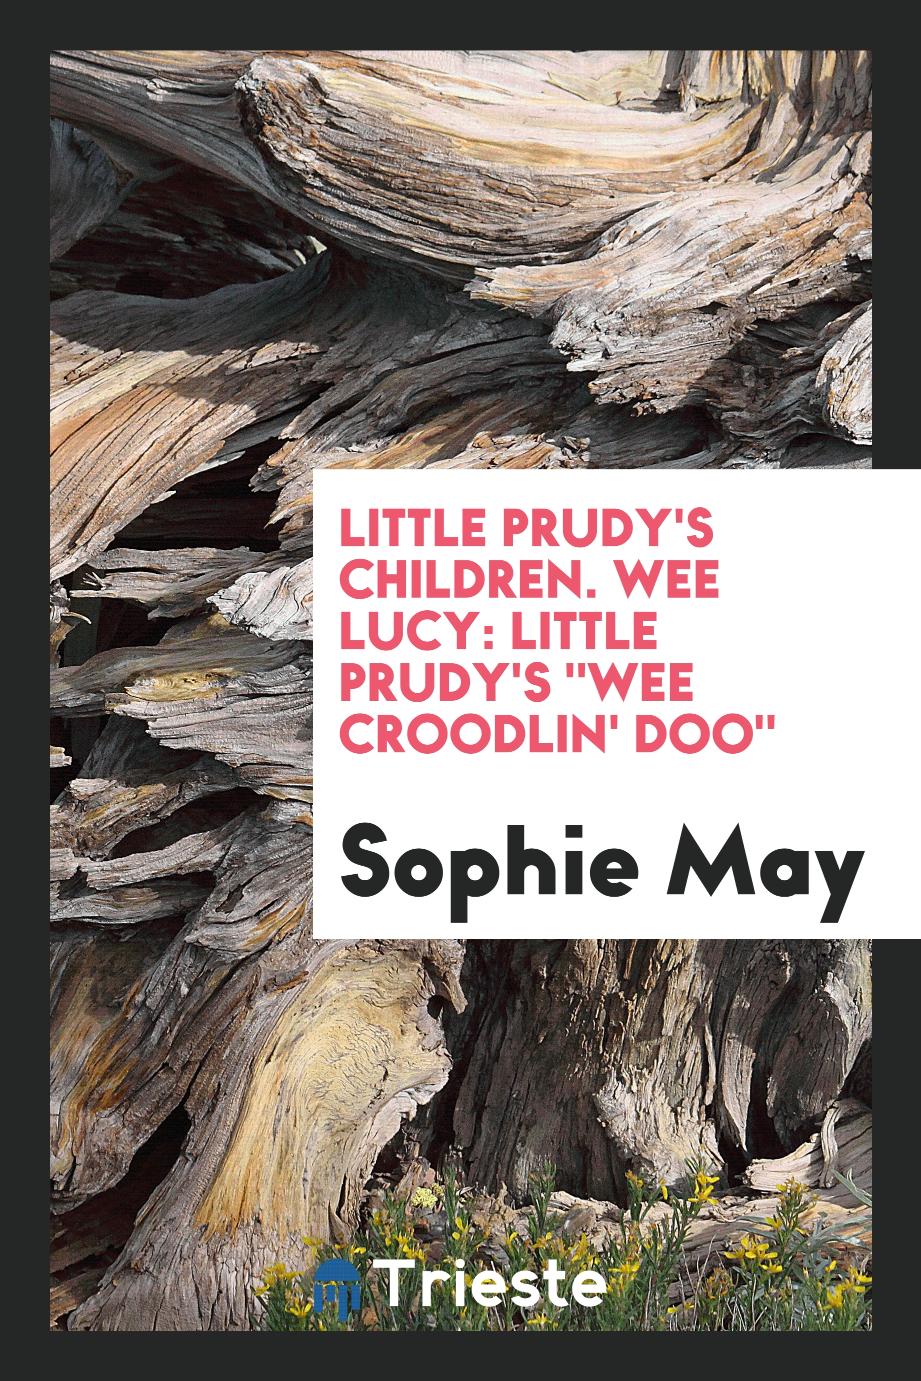 Little Prudy's Children. Wee Lucy: Little Prudy's "Wee Croodlin' Doo"